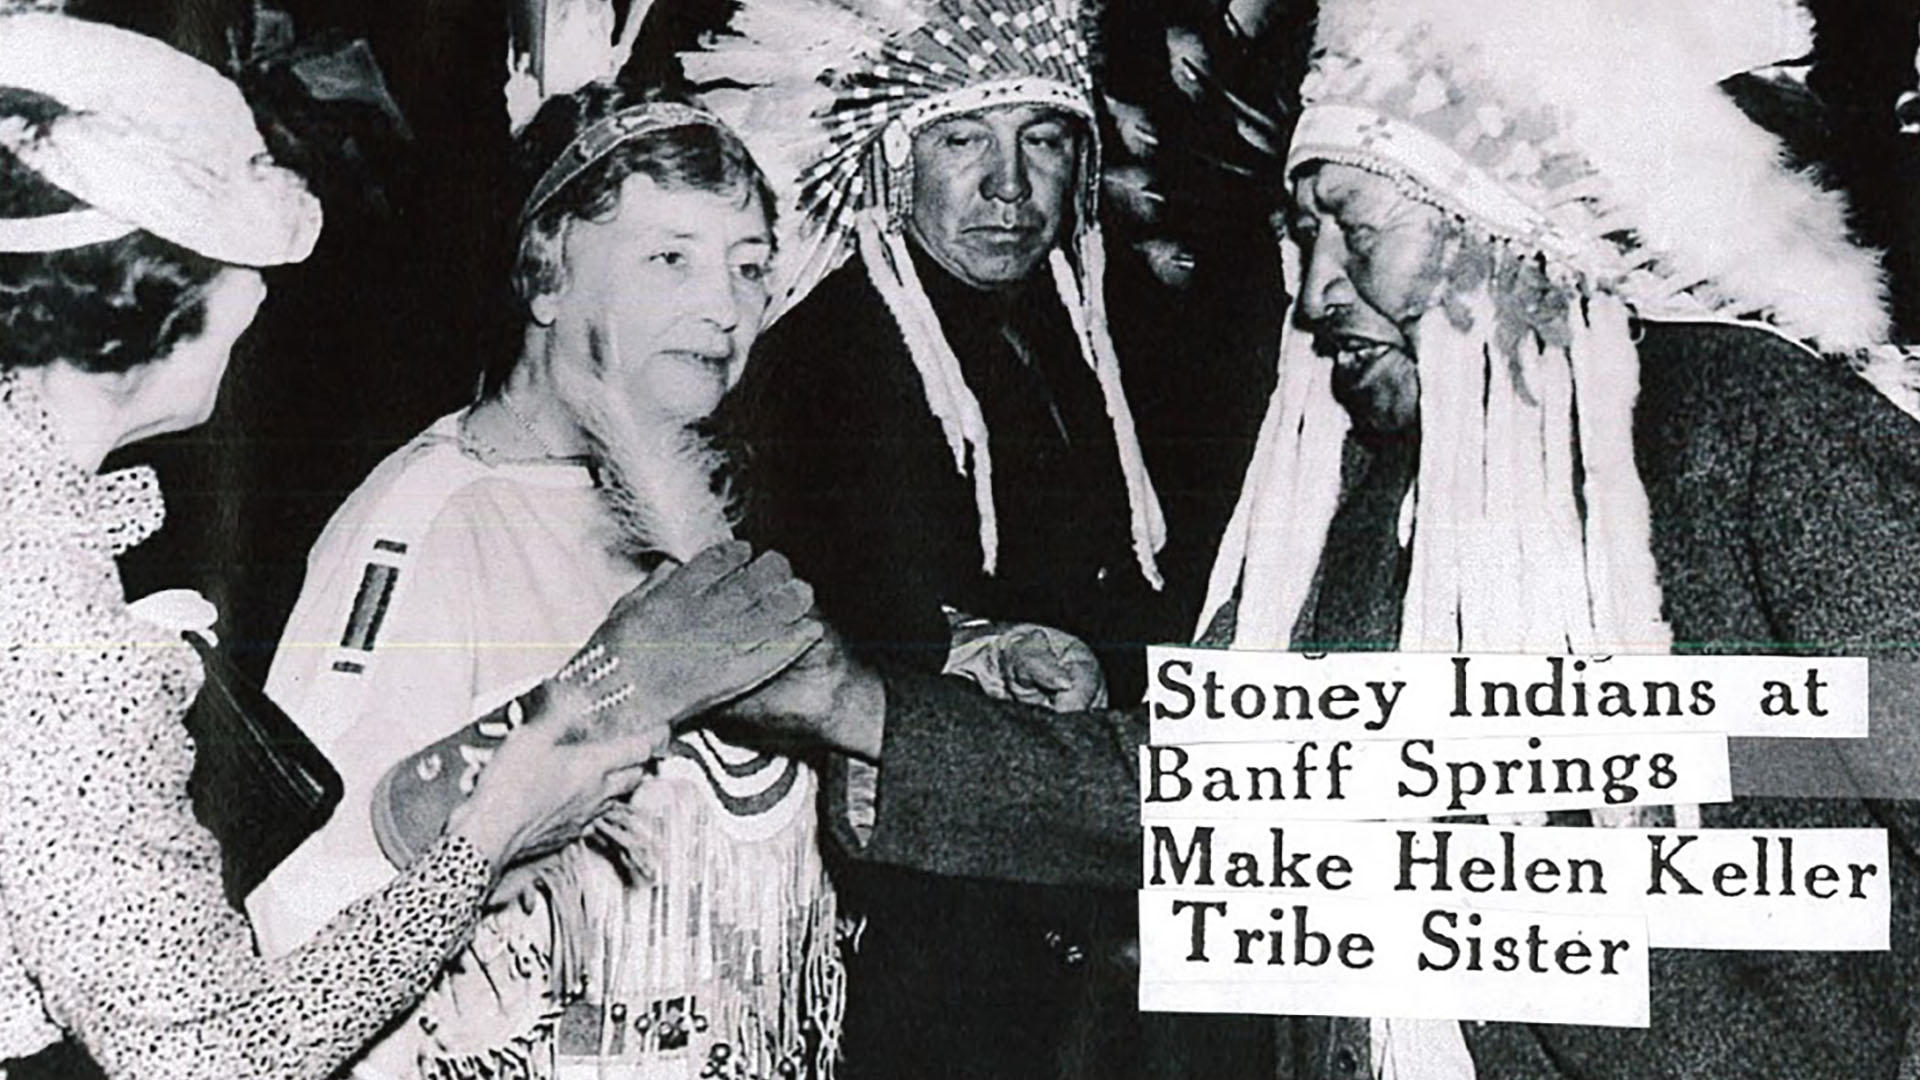 Polly Thomson and Helen Keller stand with two Native American men wearing robes and full feather headdresses. Helen wears a headband with two eagle feathers and a leather dress with fringe and beading. A caption reads, ”Stony Indians at Banff Make Helen Keller Tribe Sister.”